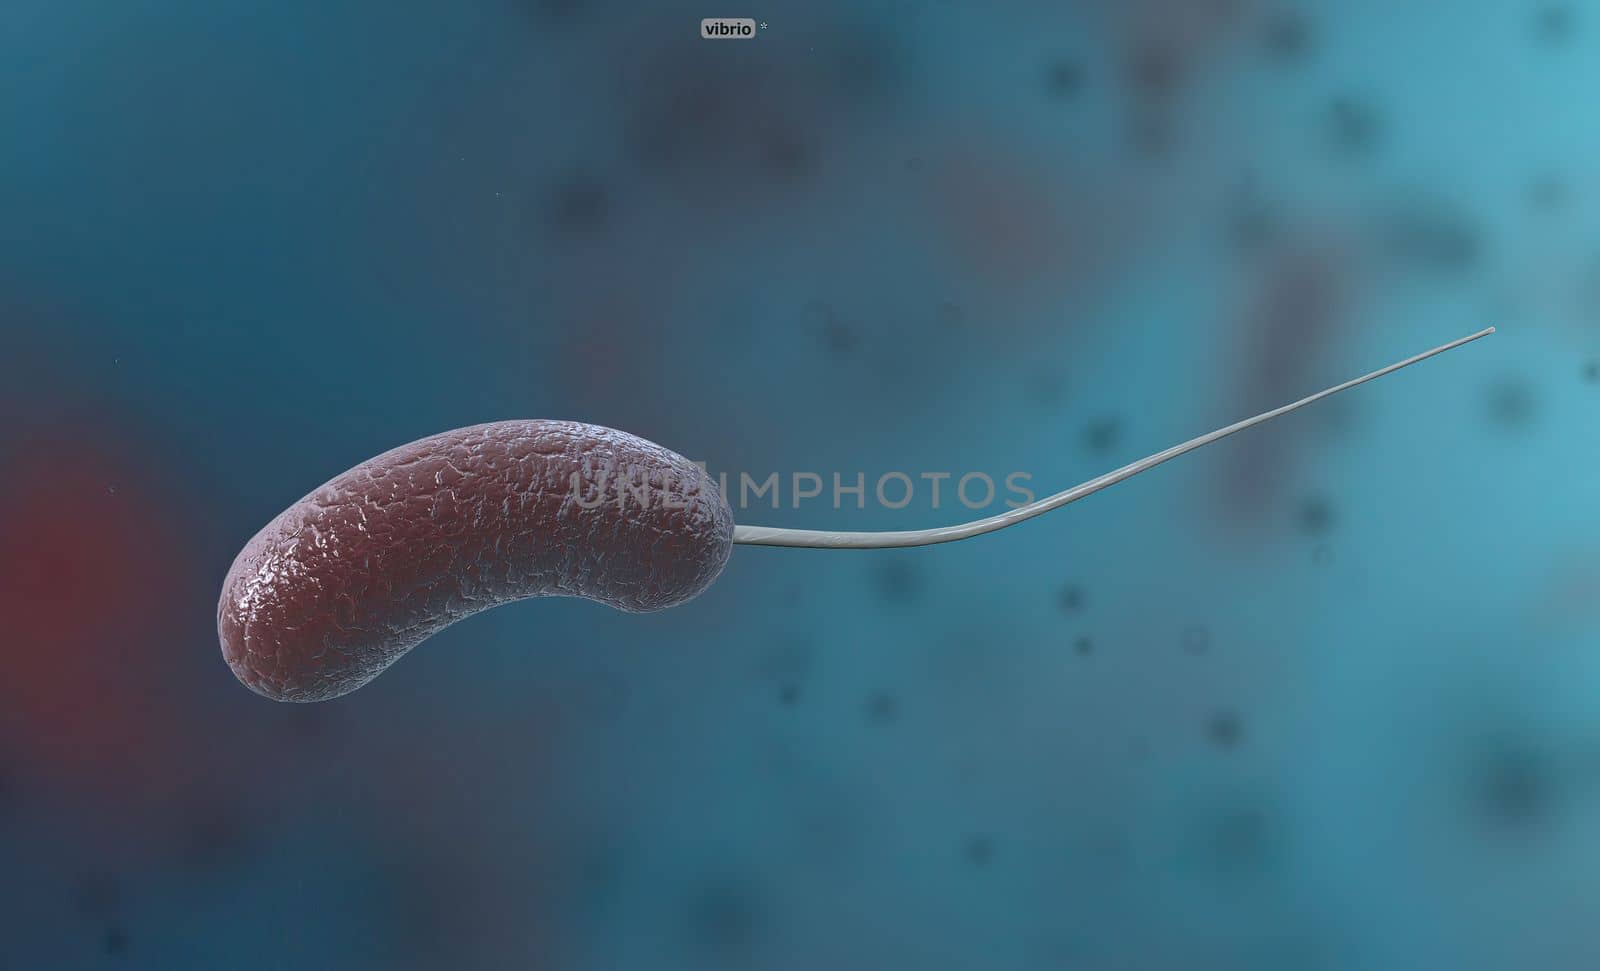 Vibrio is a type of bacteria consisting of bent rod-shaped gram-negative bacteria. by creativepic